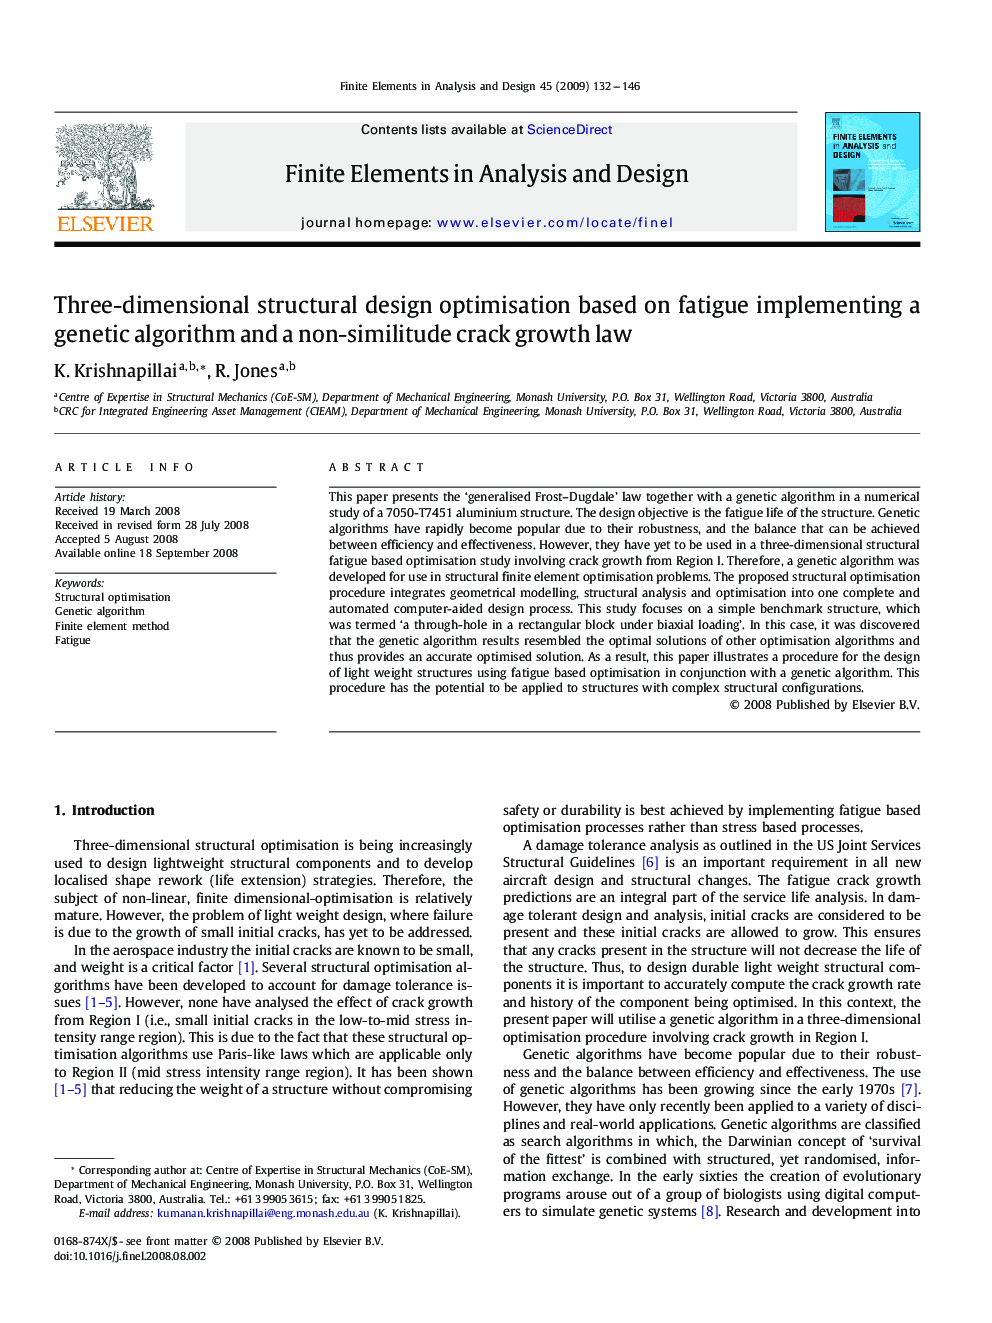 Three-dimensional structural design optimisation based on fatigue implementing a genetic algorithm and a non-similitude crack growth law